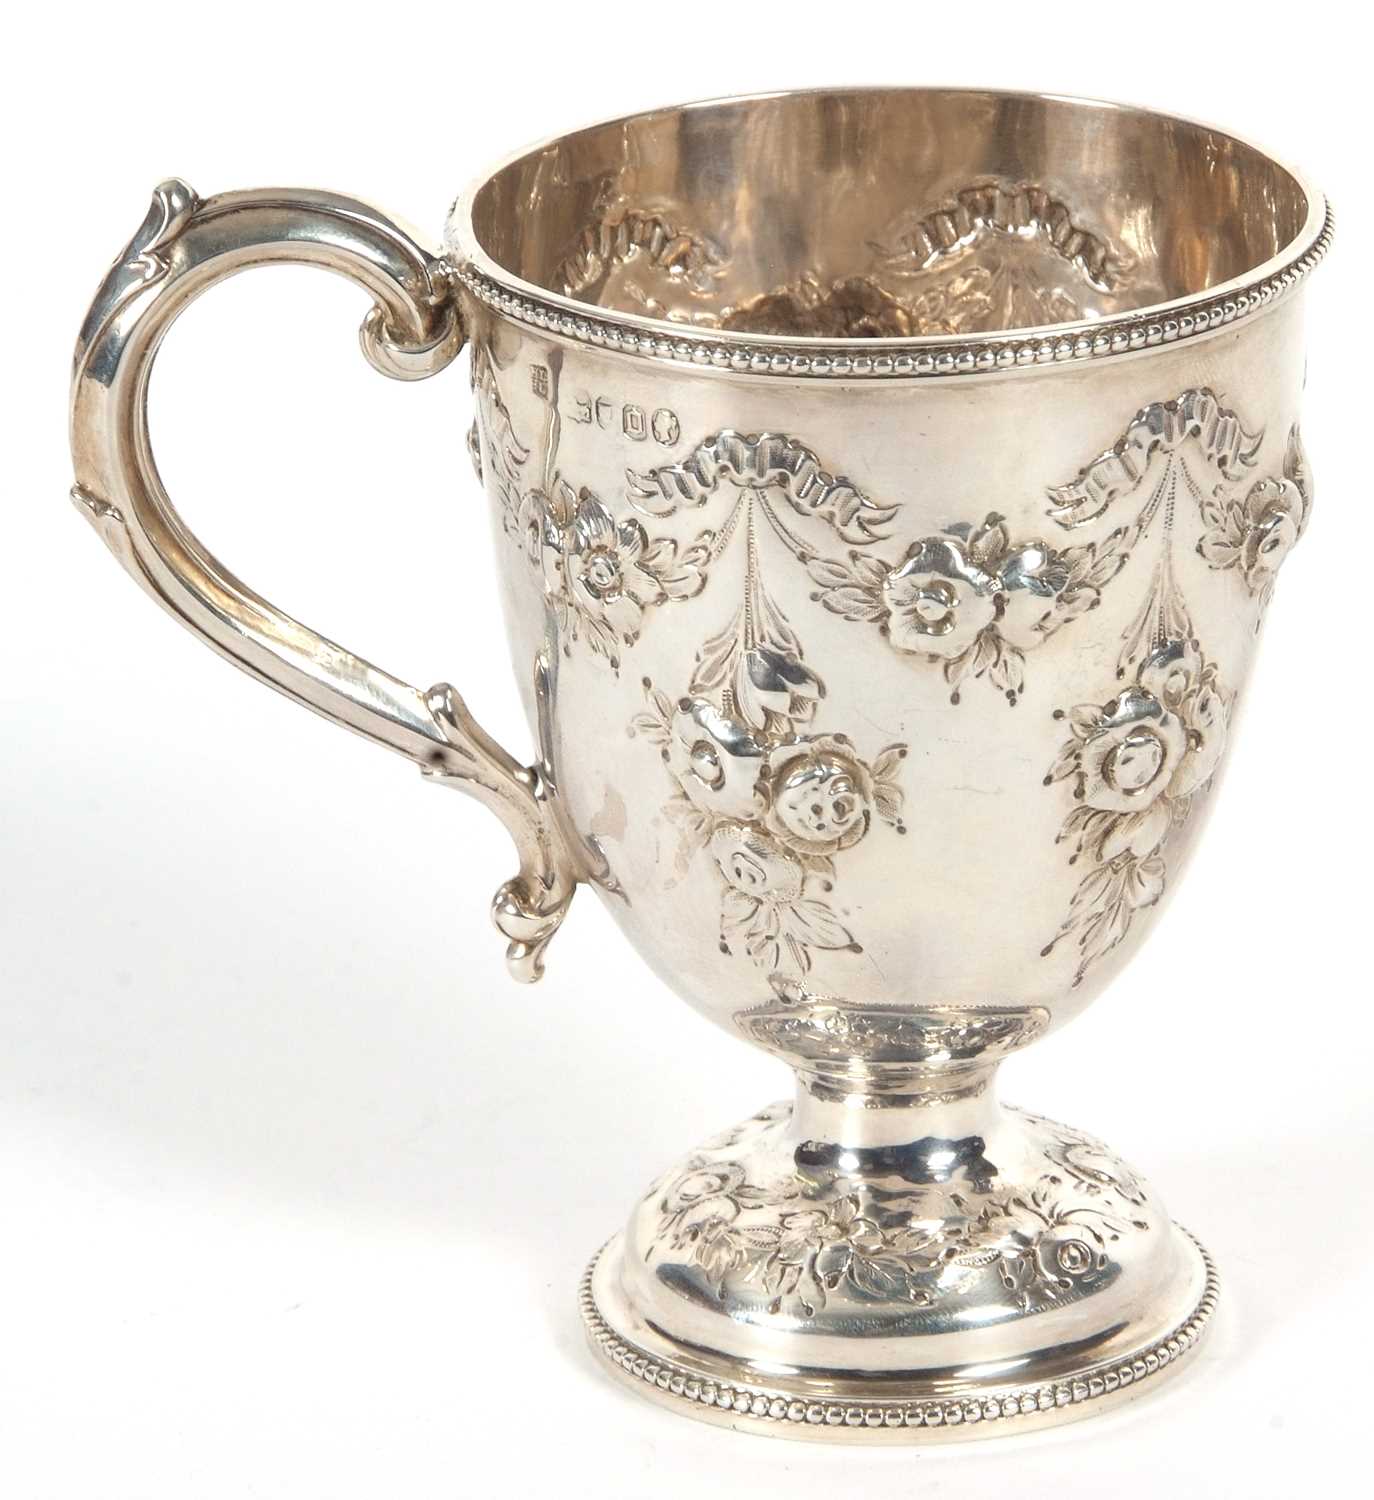 A Victorian silver mug of trophy shape having a capped scroll handle, beaded rim and foot with